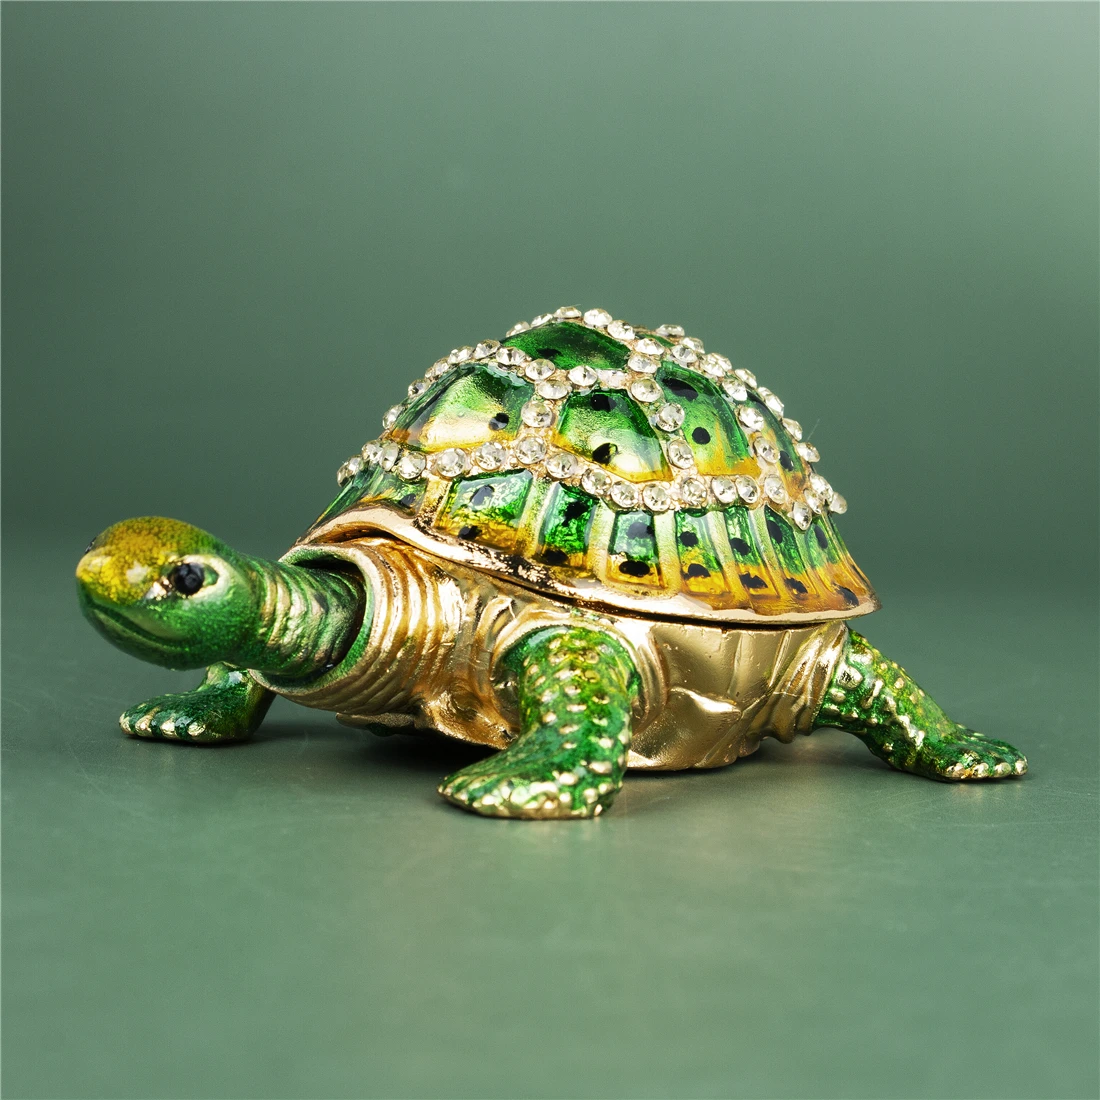 H&D Green Turtle Jewelry Trinket Boxes Hinged,Crystal Bejeweled Turtle Animal Figurines Collectible,Tortoise Lover Gifts